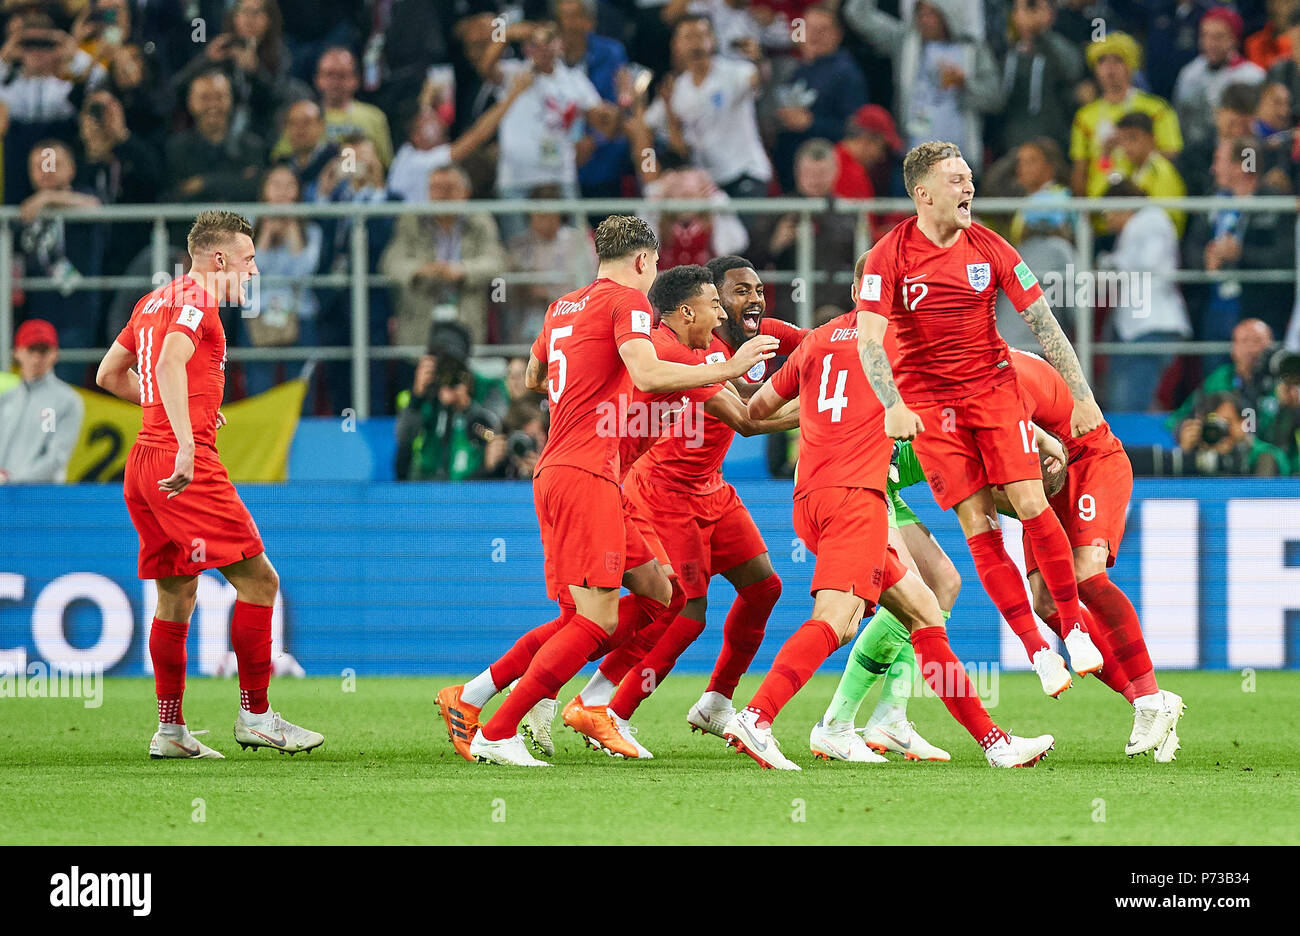 England- Columbia, Soccer, Moscow, July 03, 2018 Eric DIER, England 4 shoot goals the decisive penalty against David OSPINA, Columbia Nr.1 and celebrates with teammates Jesse LINGARD, England 7 Harry KANE, England 9  Marcus RASHFORD, Eng 19 Kieran TRIPPER, England 12 John STONES, England 5 Eric DIER, England 4 Jordan PICKFORD, England 1  ENGLAND - COLUMBIA 1-1, 4-3 after penalty shoot-out FIFA WORLD CUP 2018 RUSSIA, Season 2018/2019,  July 03, 2018 S p a r t a k Stadium in Moscow, Russia. © Peter Schatz / Alamy Live News Stock Photo